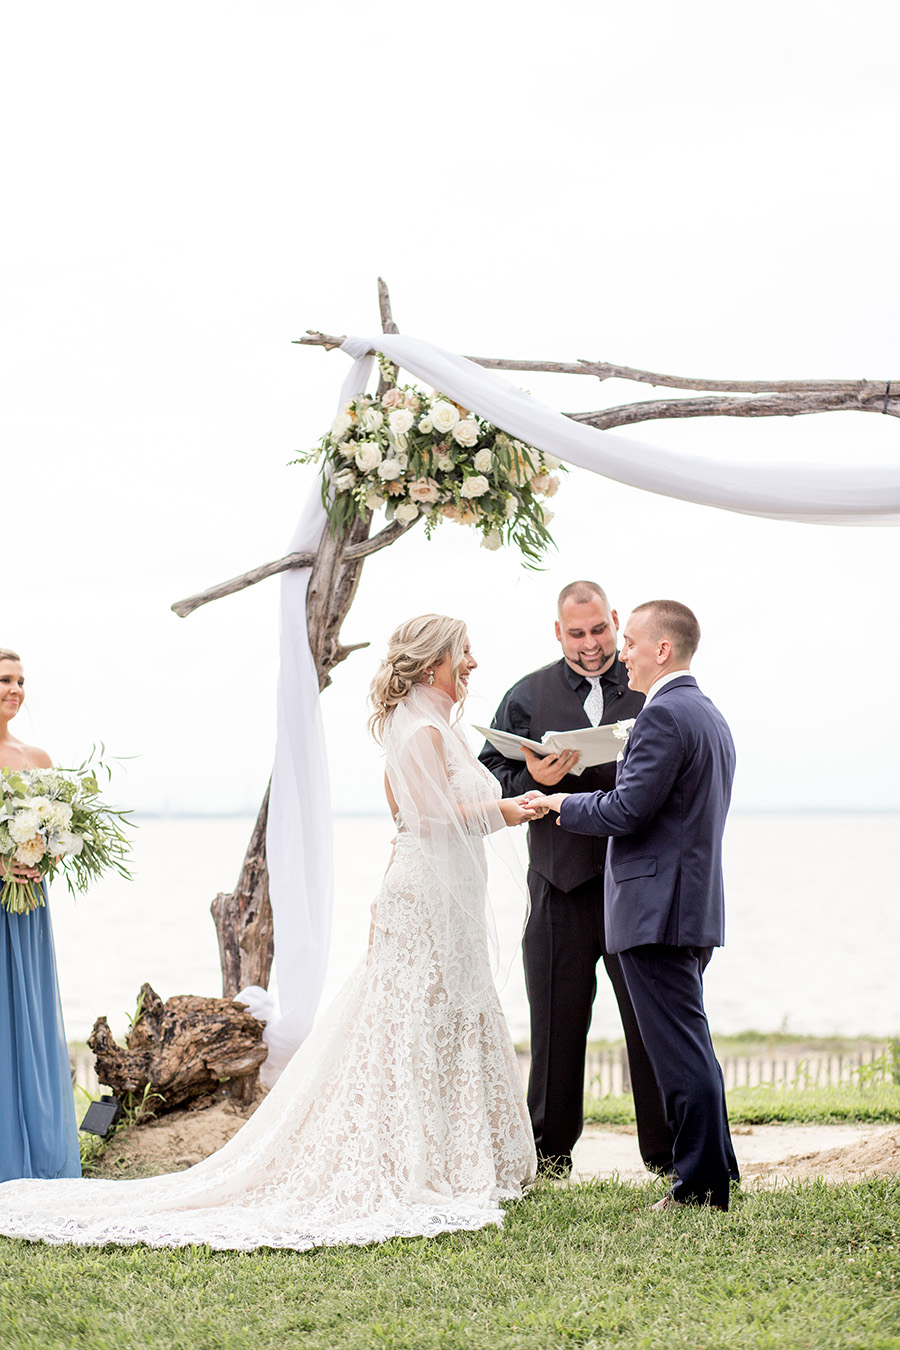 A Rustic, Romantic Wedding at the Jersey Shore